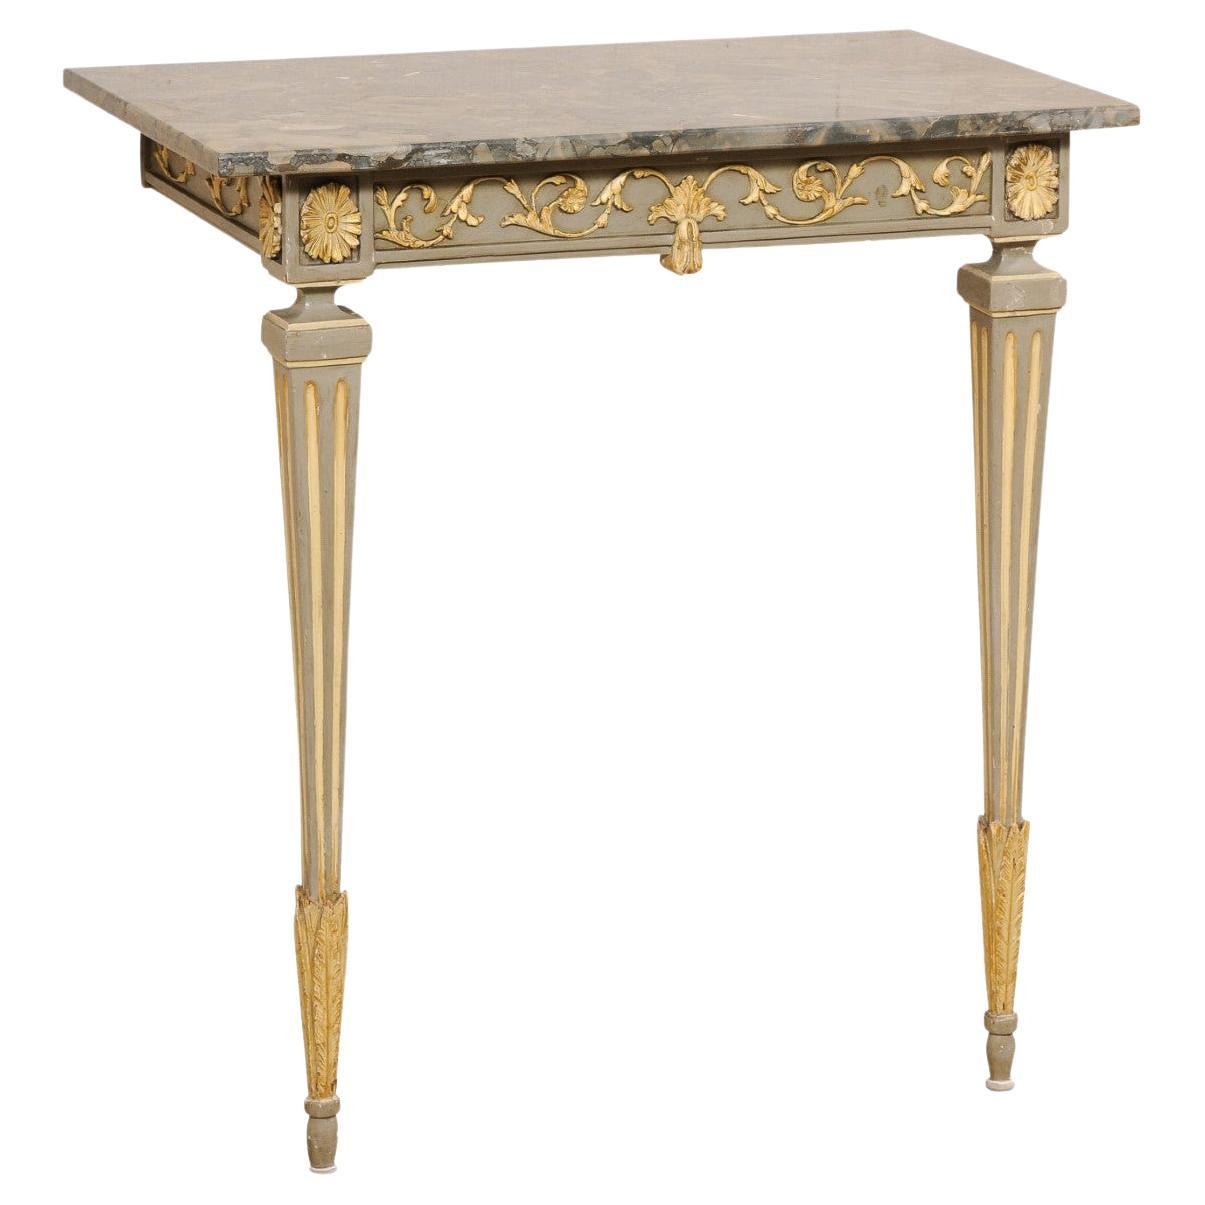 Italian 19th C. Two-Leg Carved & Gilt Wood Wall Console w/Green Marble Top For Sale